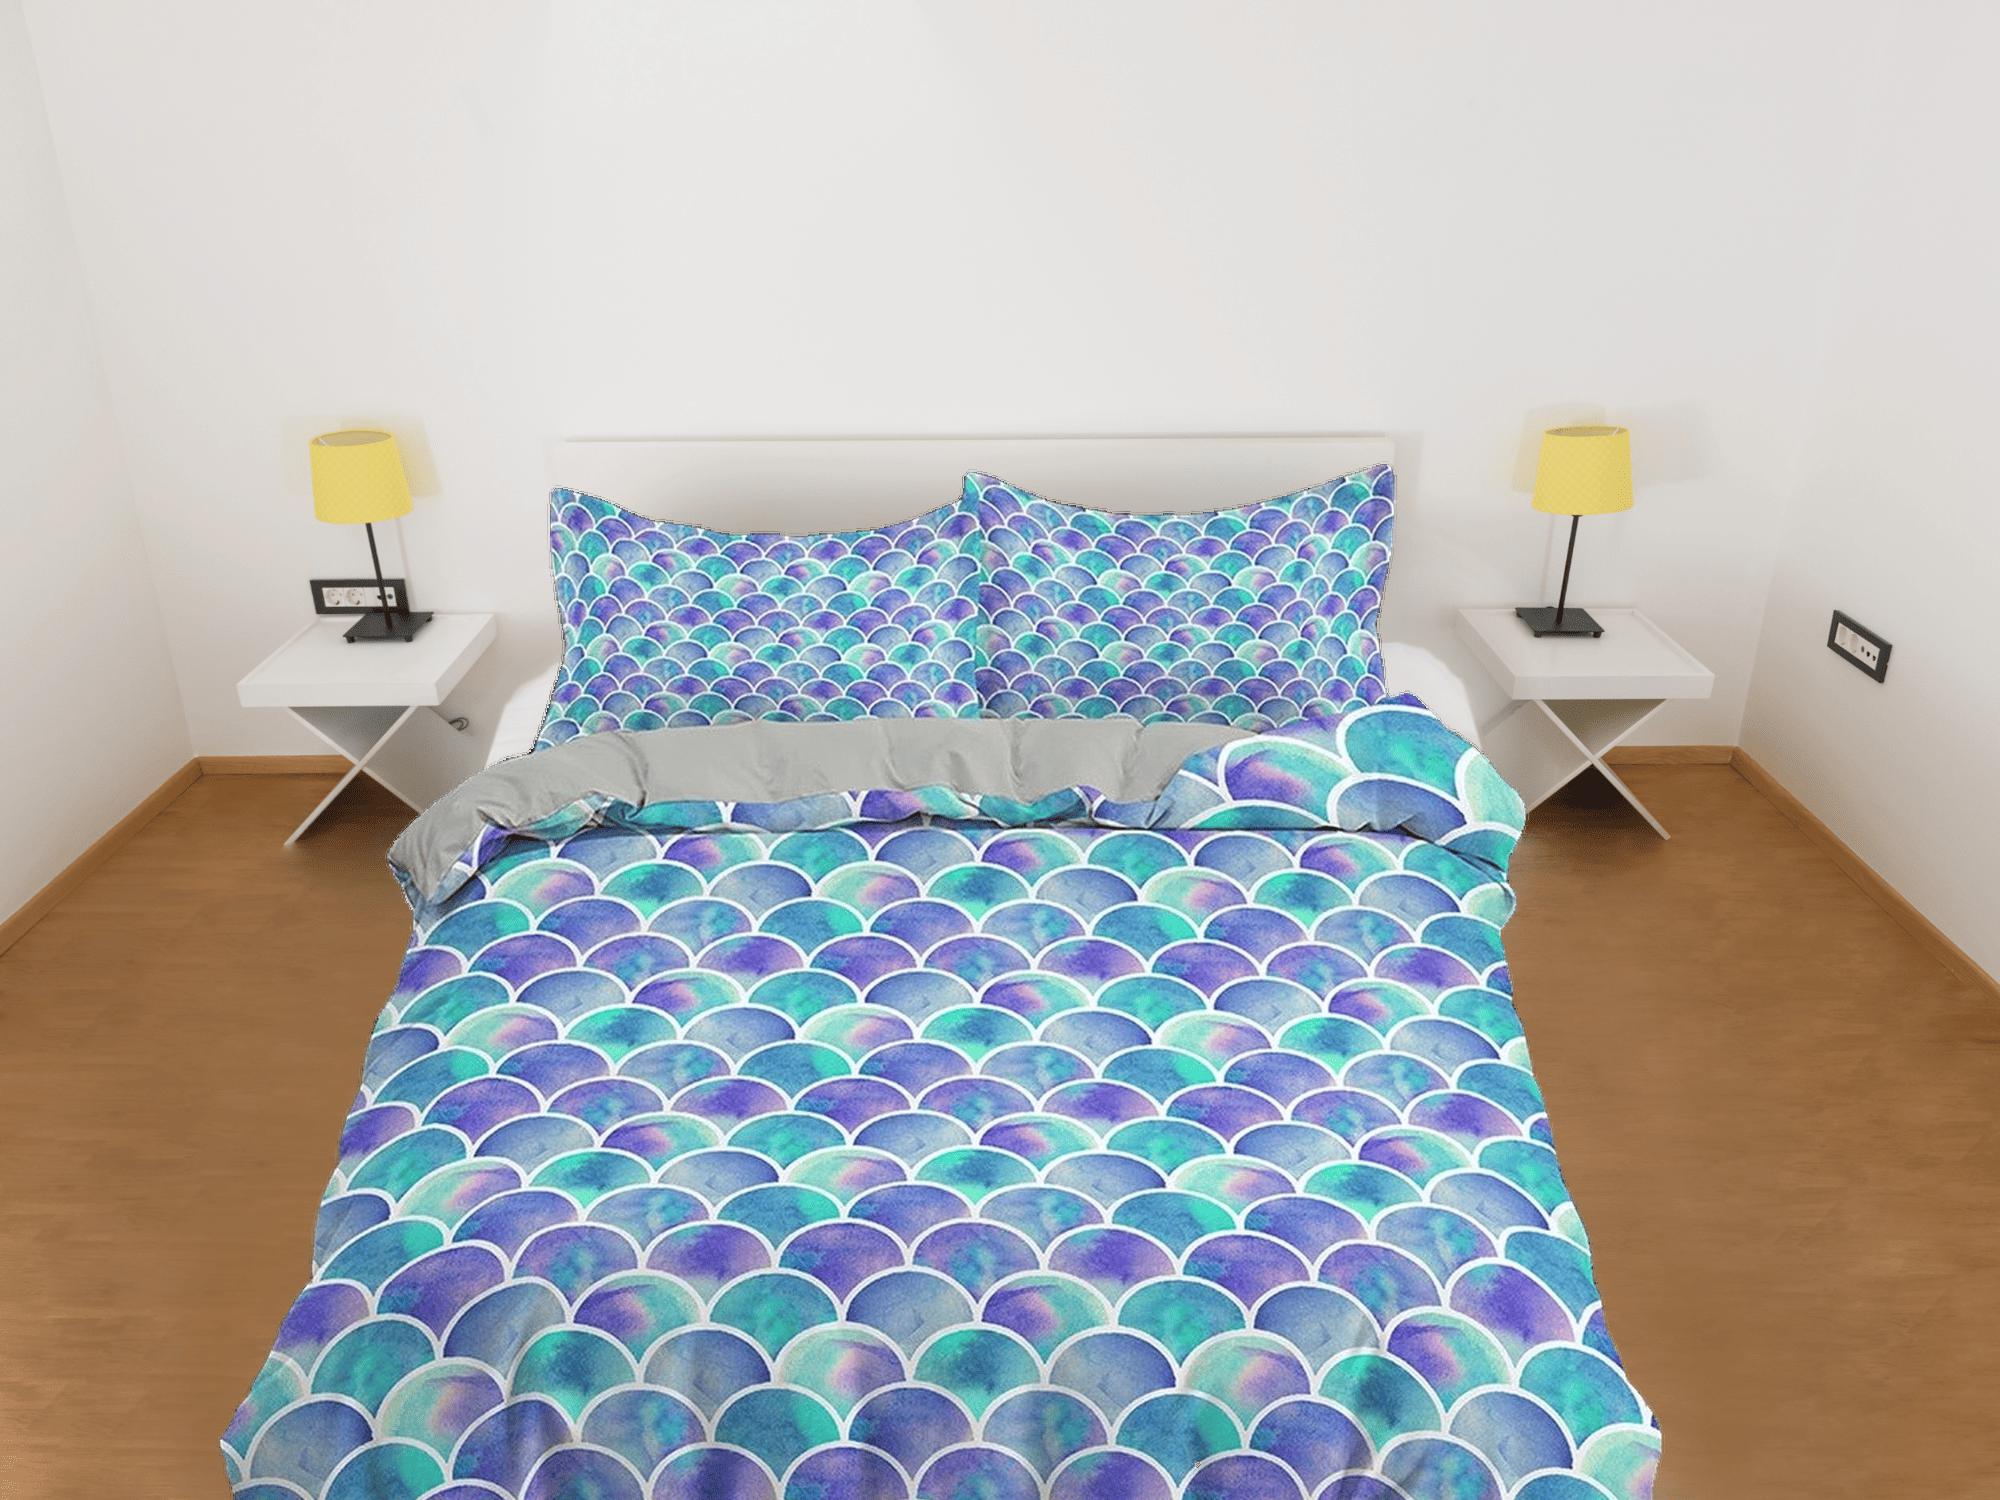 daintyduvet Purple green fish scales colorful toddler bedding, unique duvet cover kids, crib bedding, baby zipper bedding, king queen full twin